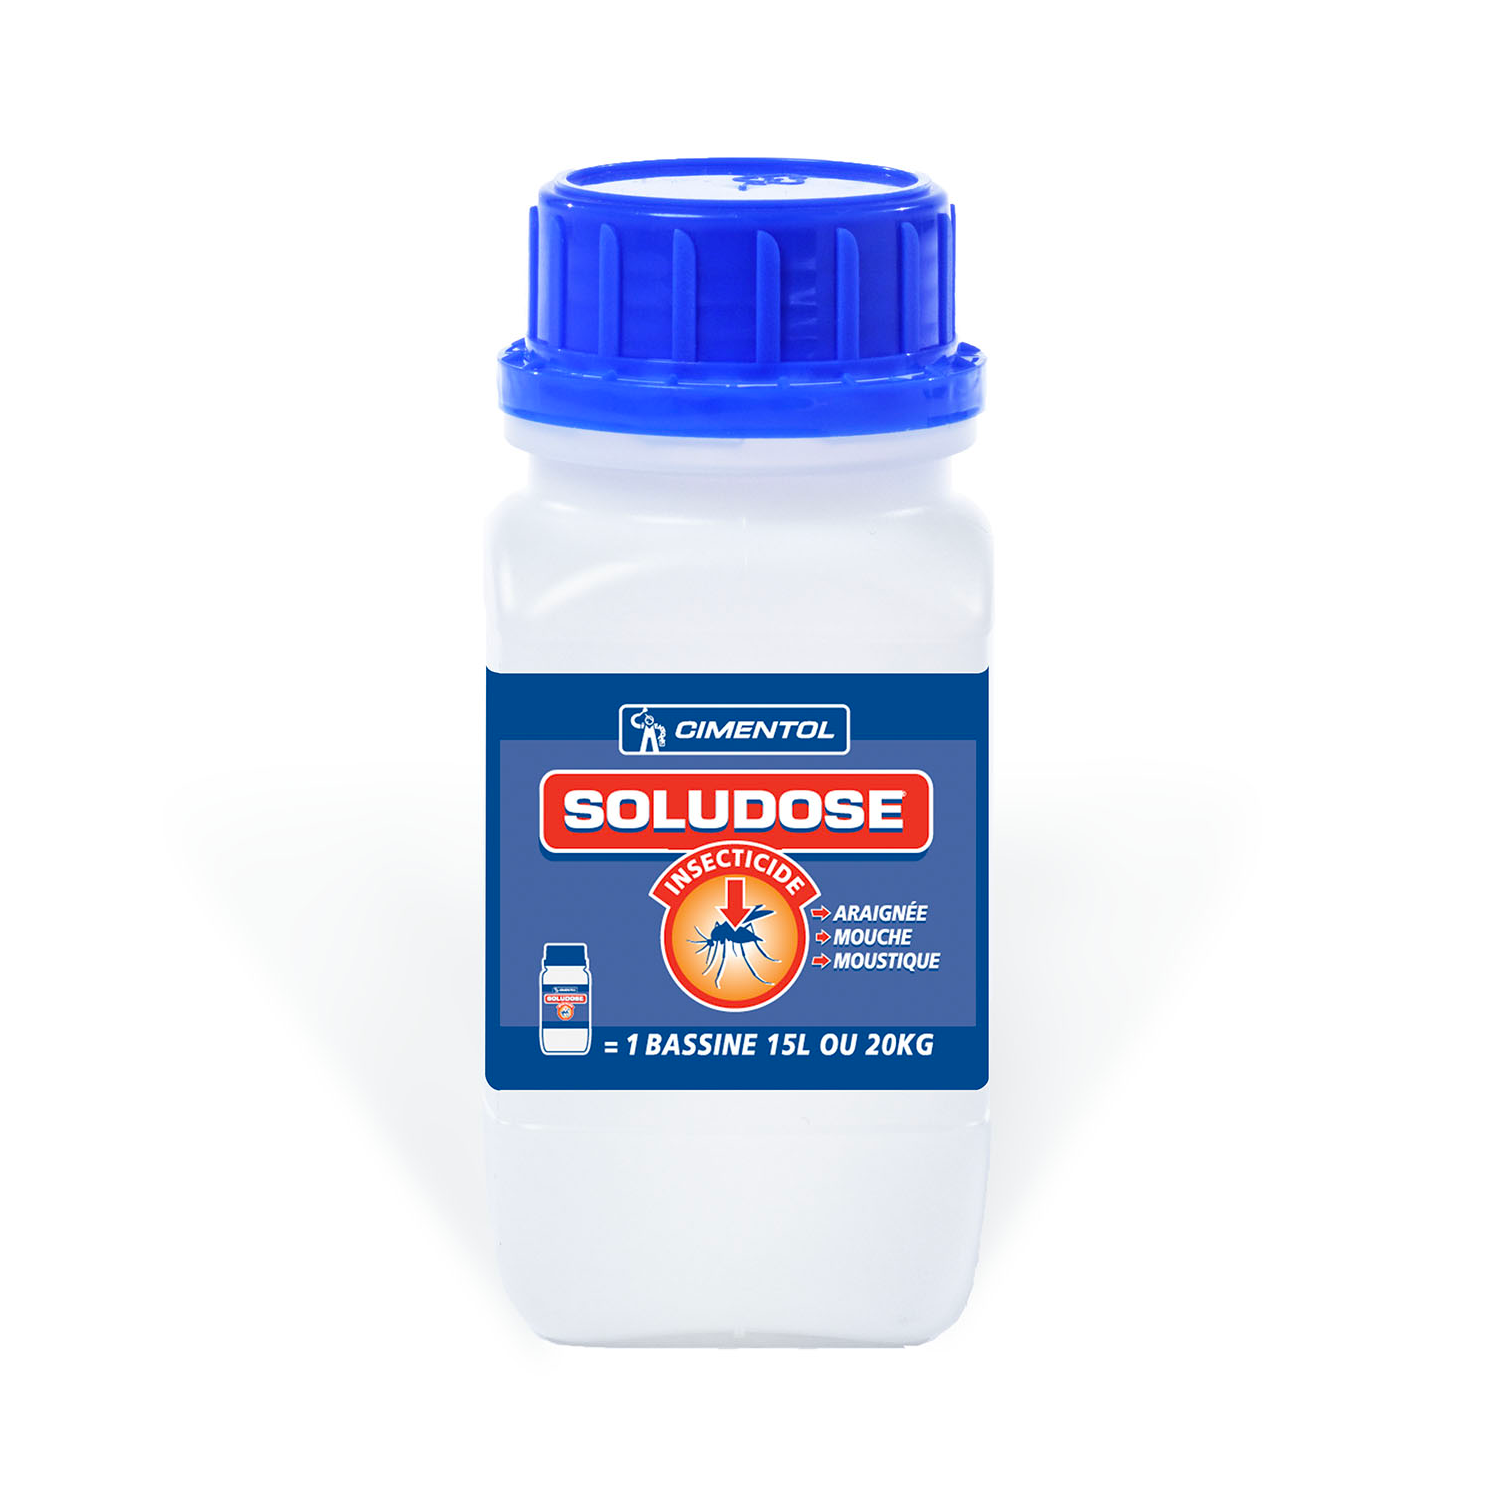 SOLUDOSE INSECTICIDE